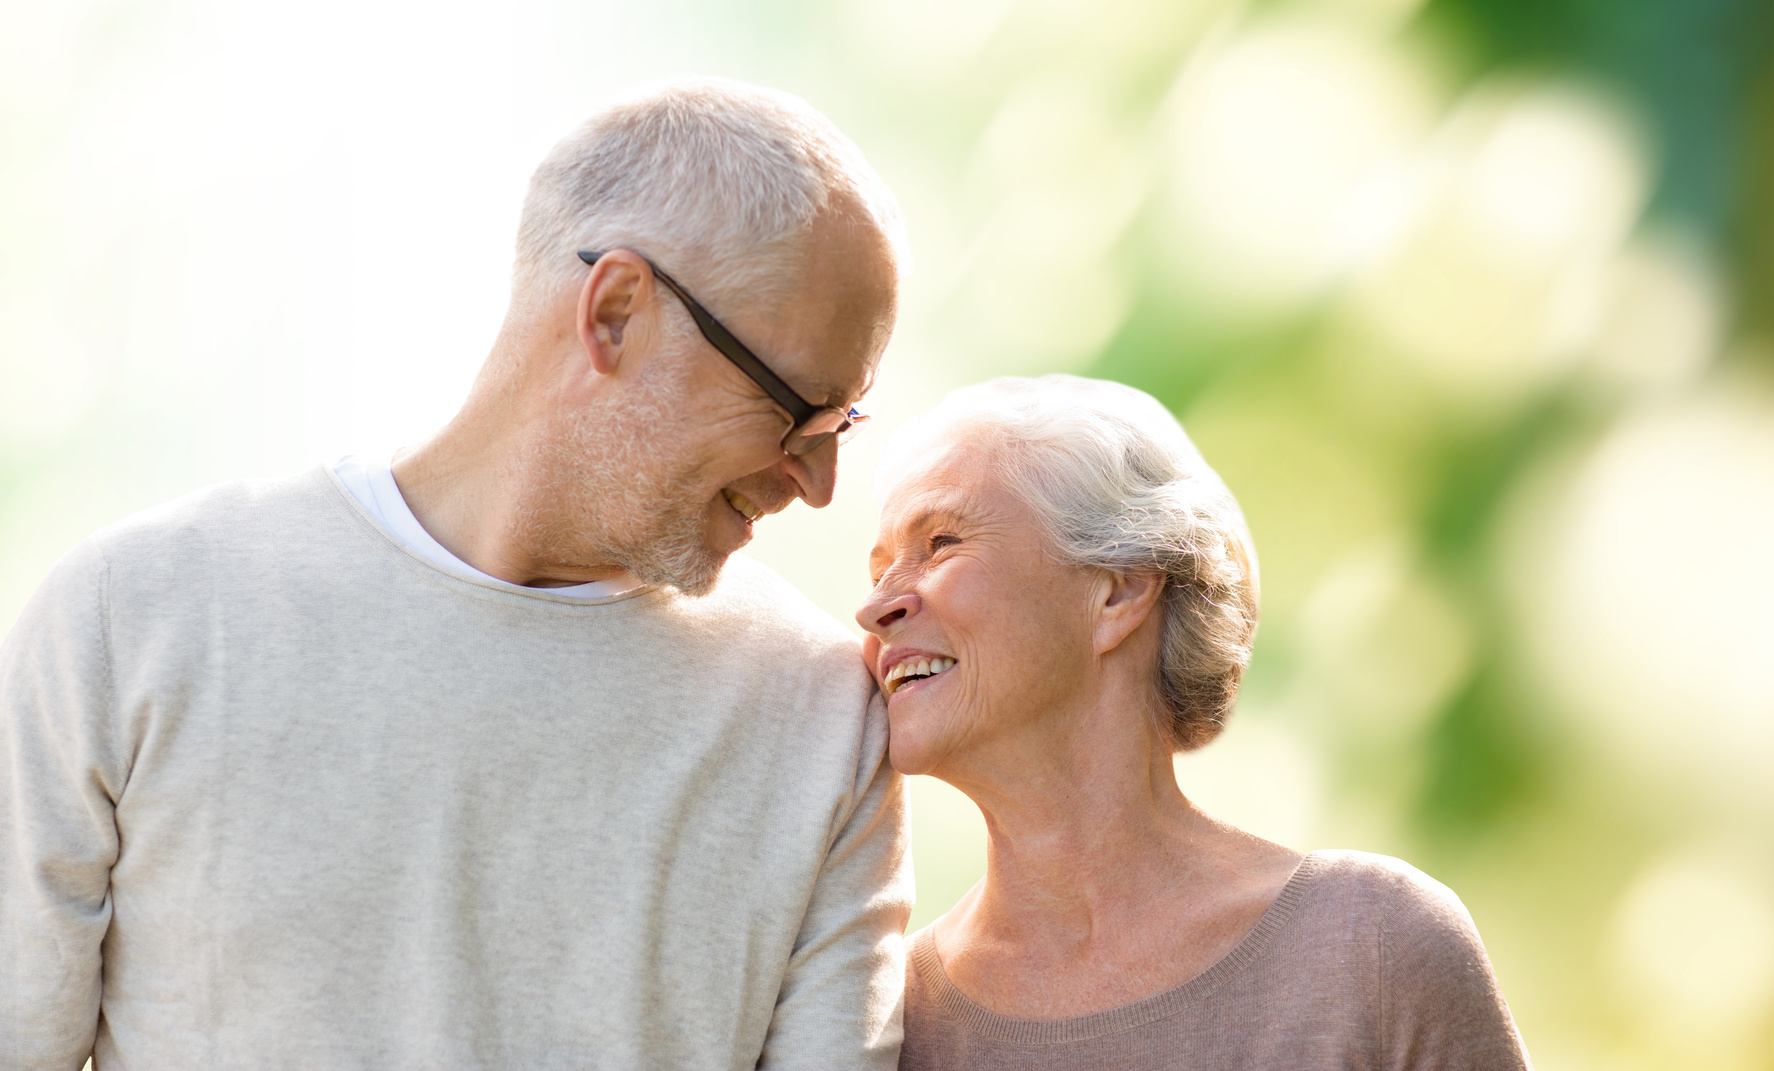 Inspirational Bible Verses to Help Seniors Go Through the Phase of Aging